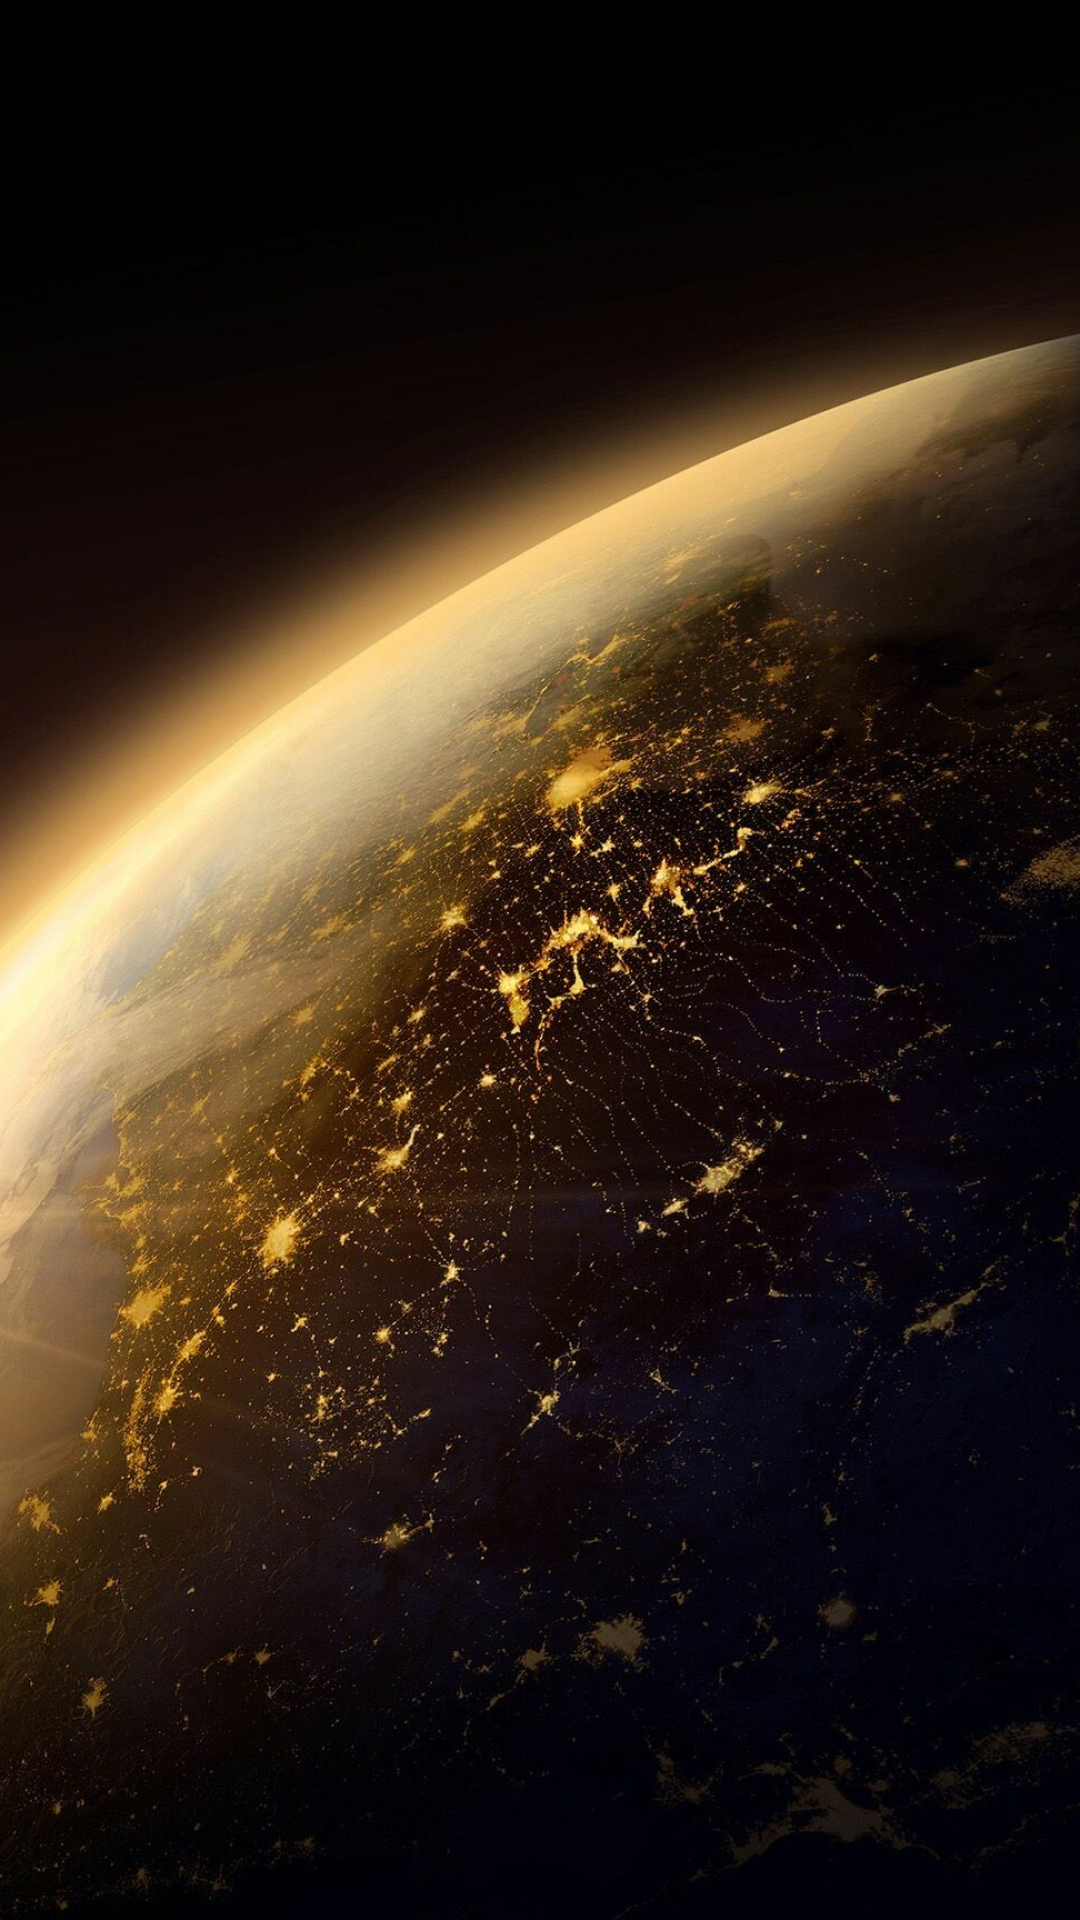 Earth at Night: Before dusk, Twilight zone, Darkness, Lights, Horizon, Planet. 1080x1920 Full HD Background.